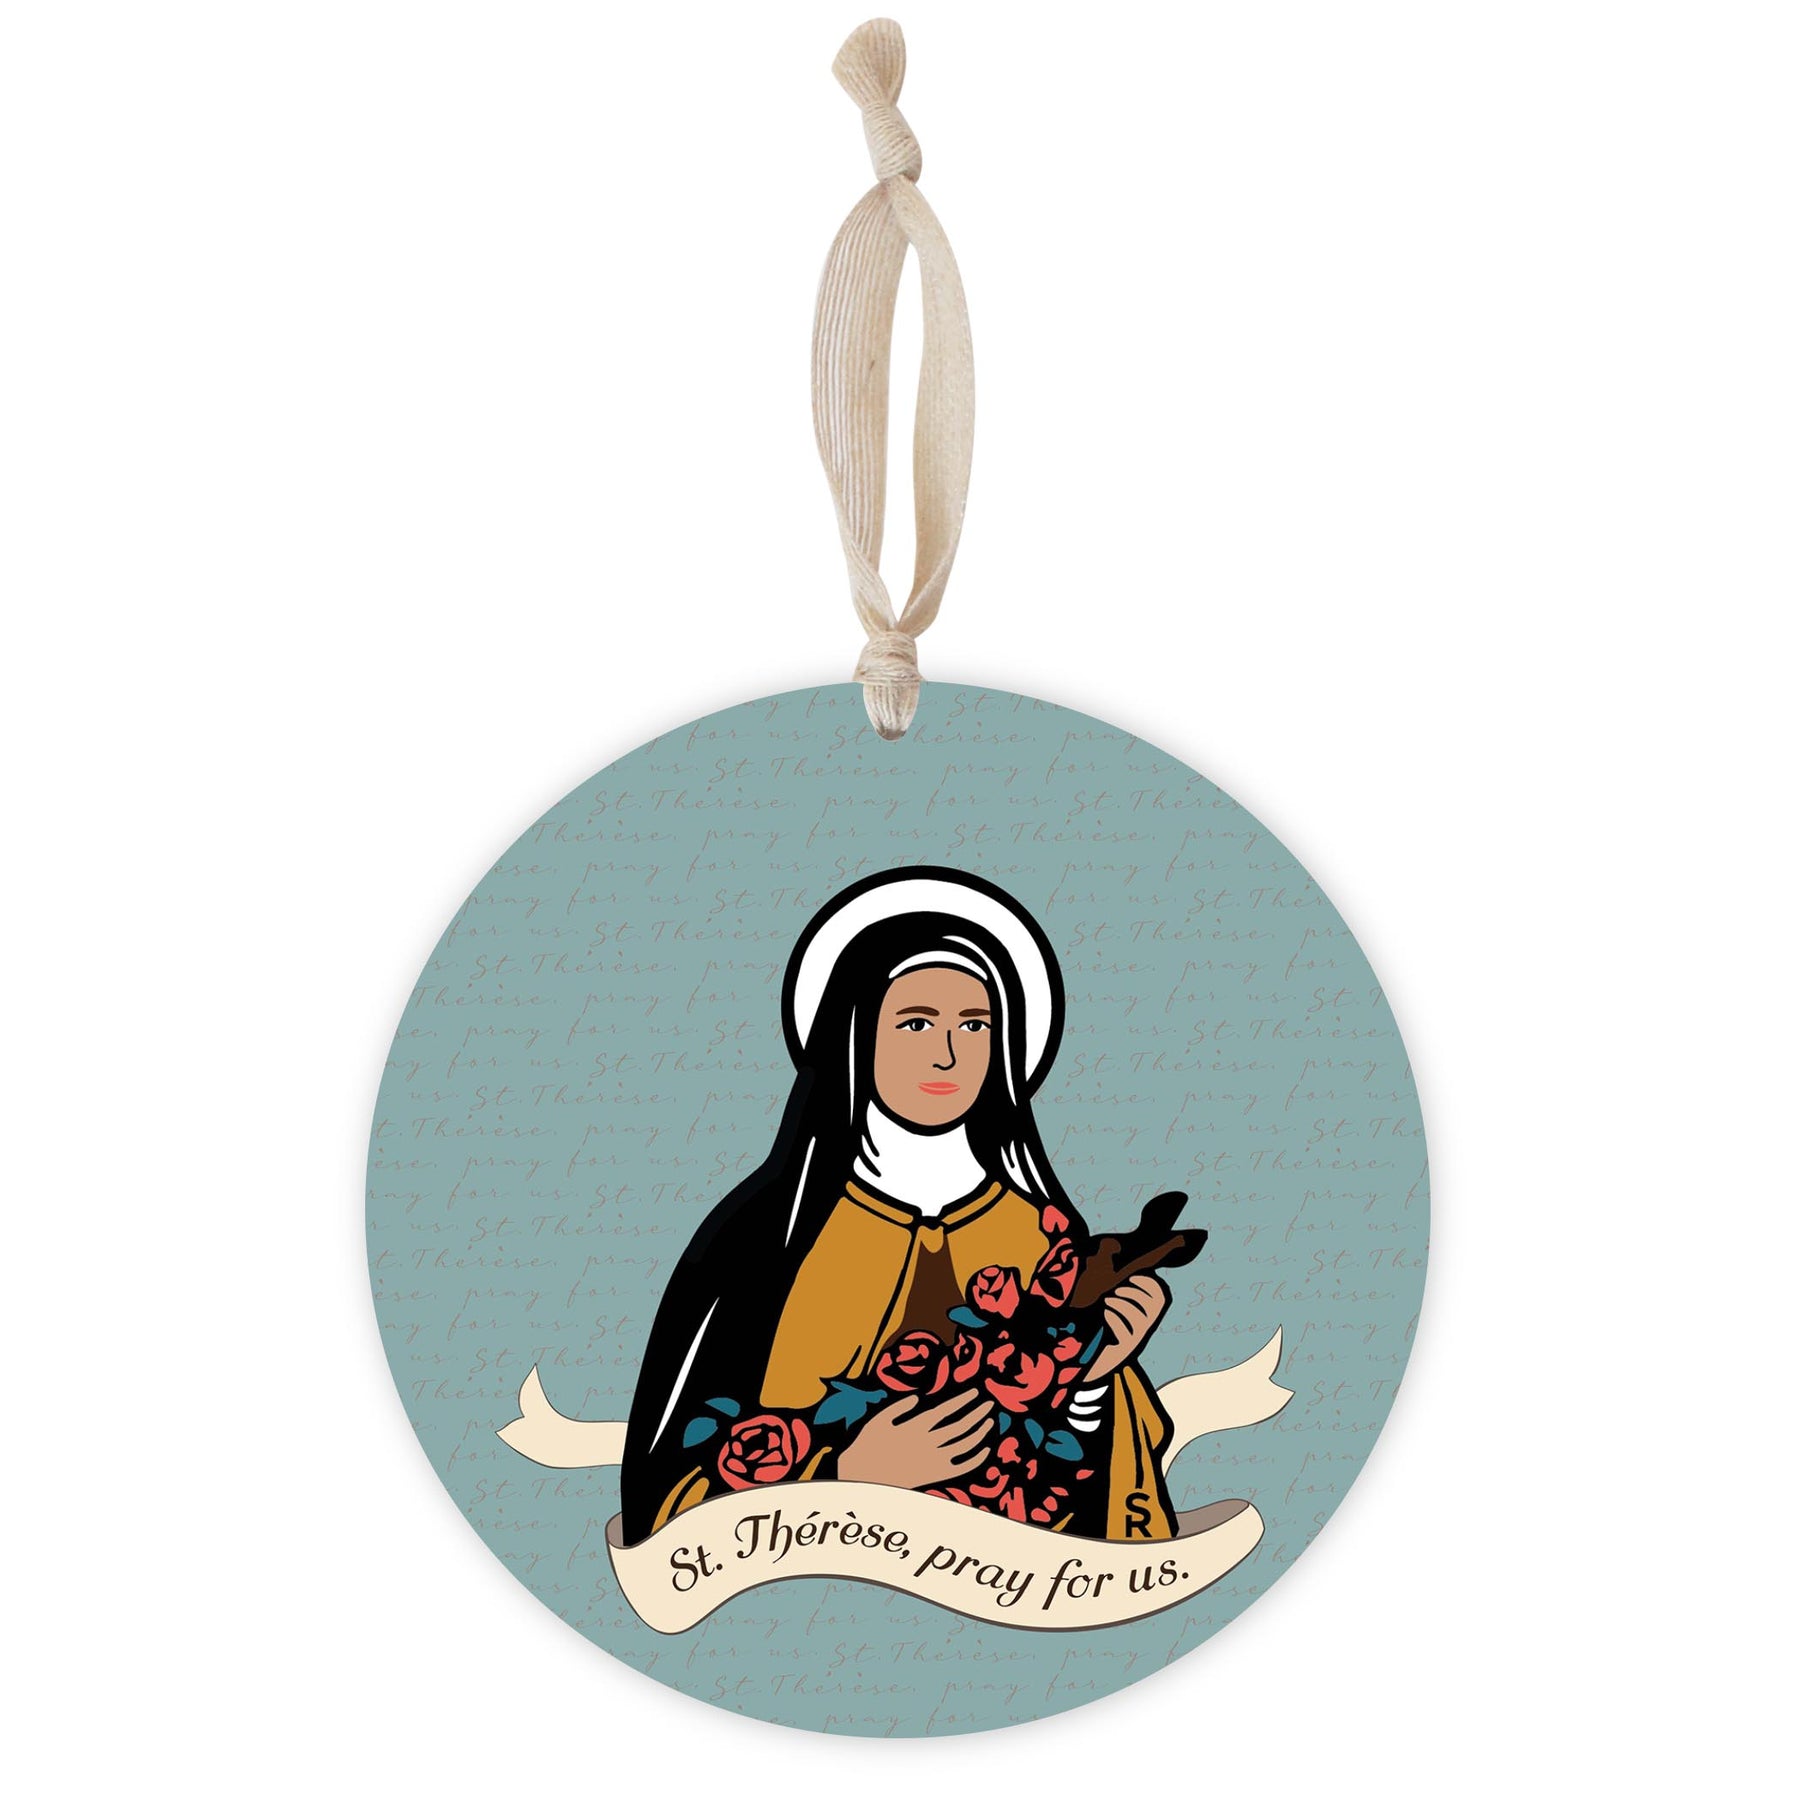 St. Therese of Lisieux Round 8 inch Hanging Wood Plaque